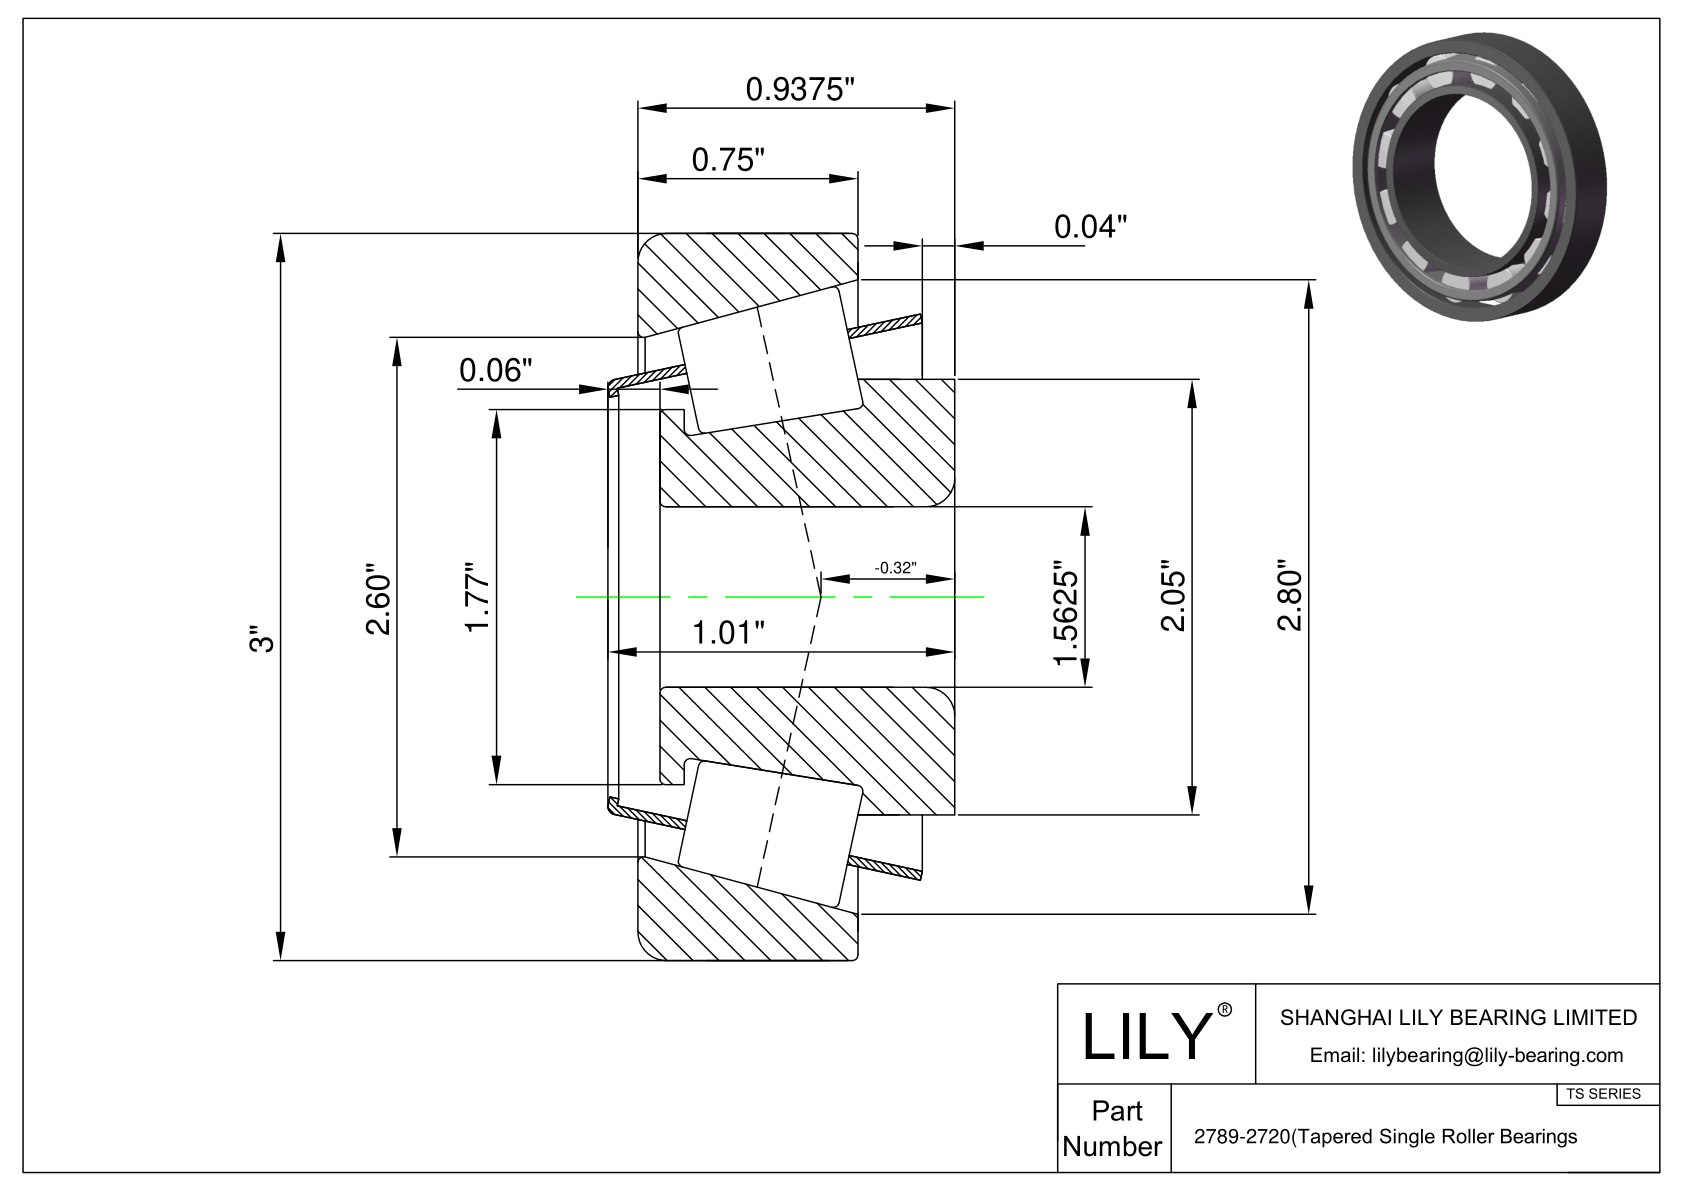 2789-2720 TS (Tapered Single Roller Bearings) (Imperial) cad drawing